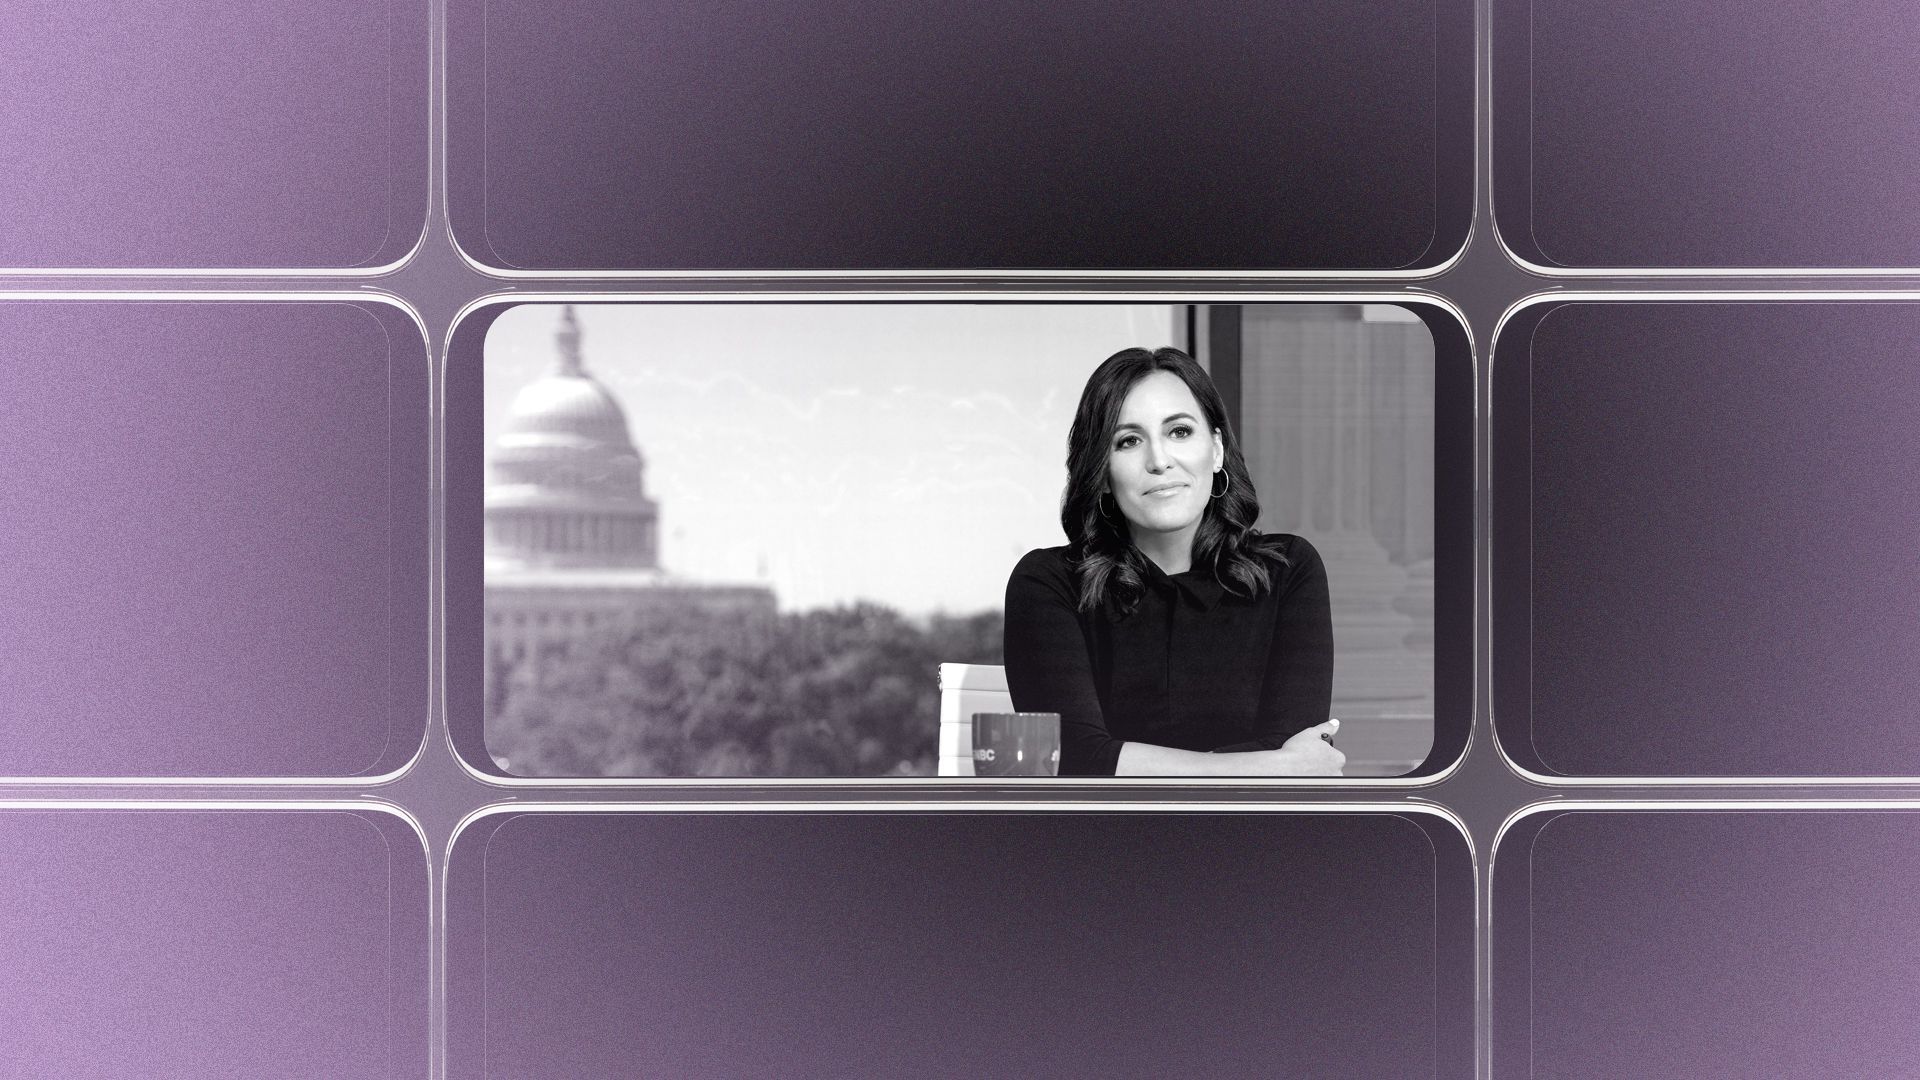 Photo illustration of a grid of smartphone screens, the center one showing an image of Hallie Jackson.